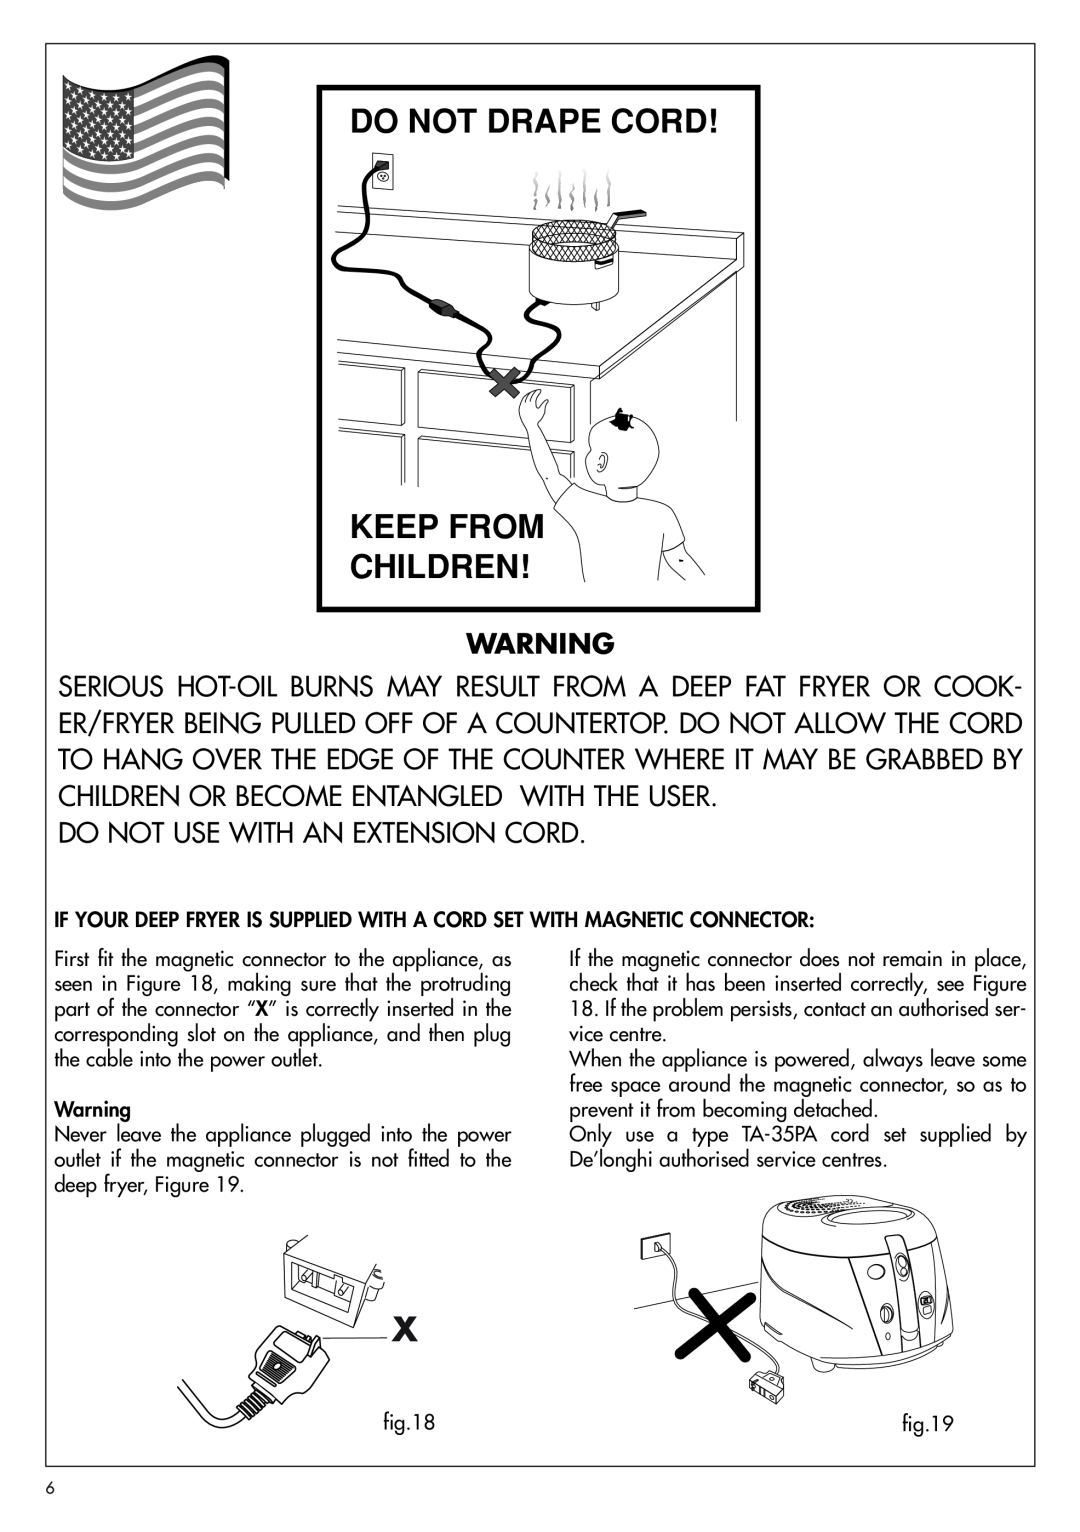 DeLonghi D895UX manual Do Not Use With An Extension Cord, Do Not Drape Cord, Keep From, Children 